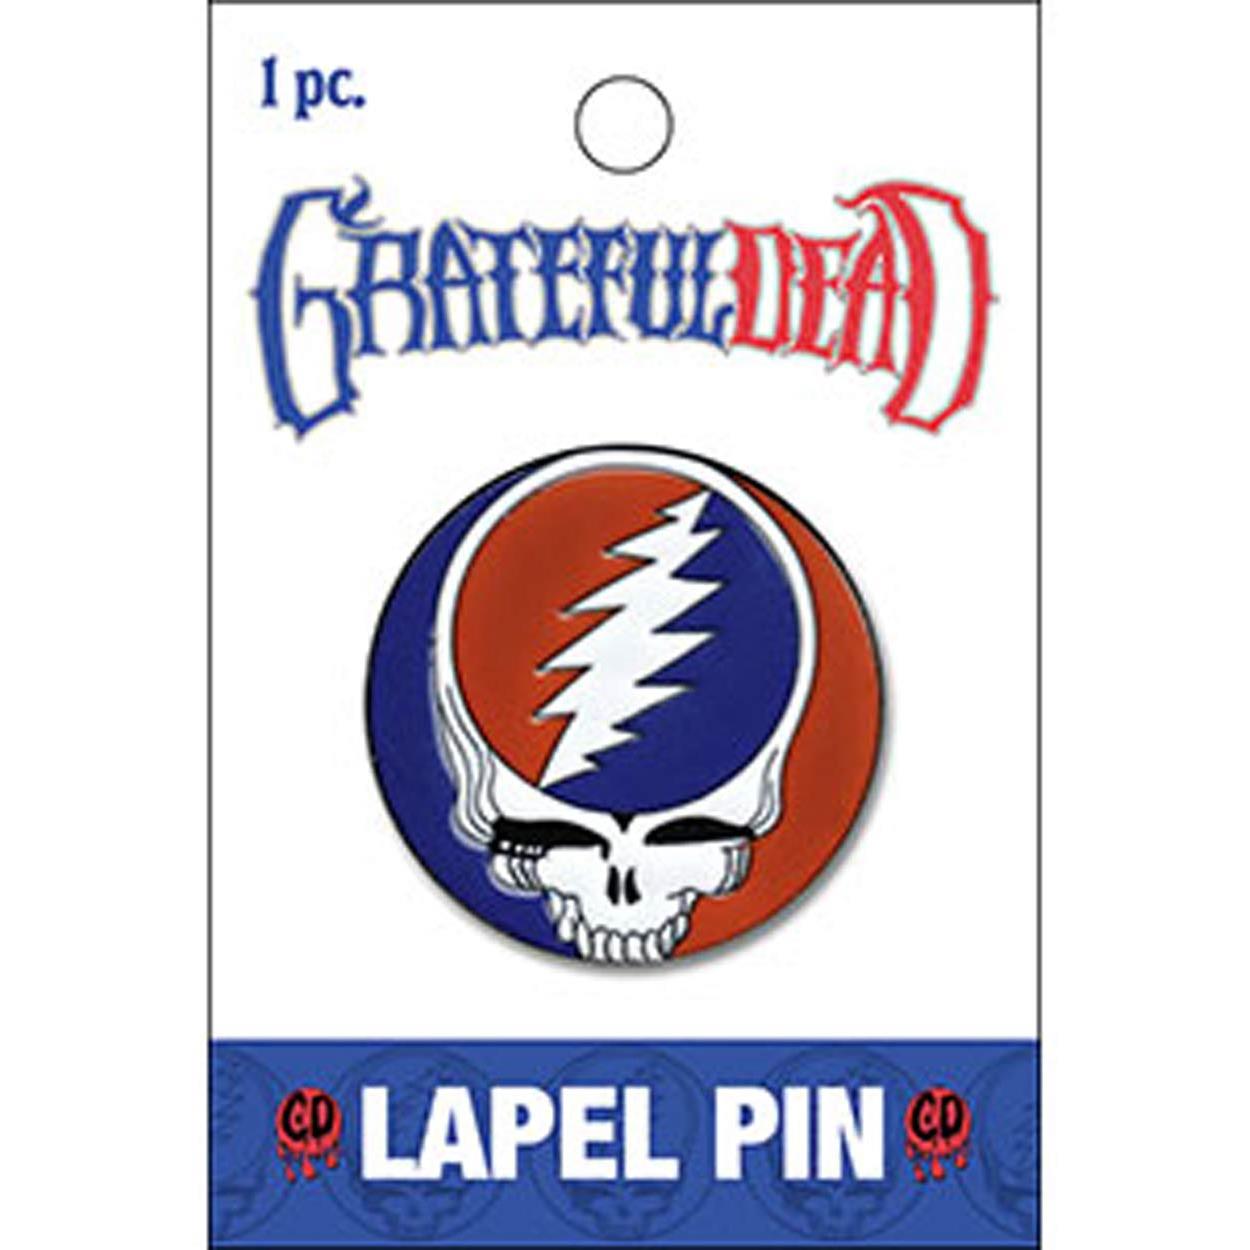 C&D Visionary Grateful Dead Sead Steal Your Face Metal Lapel Pin, Red, Blue, White